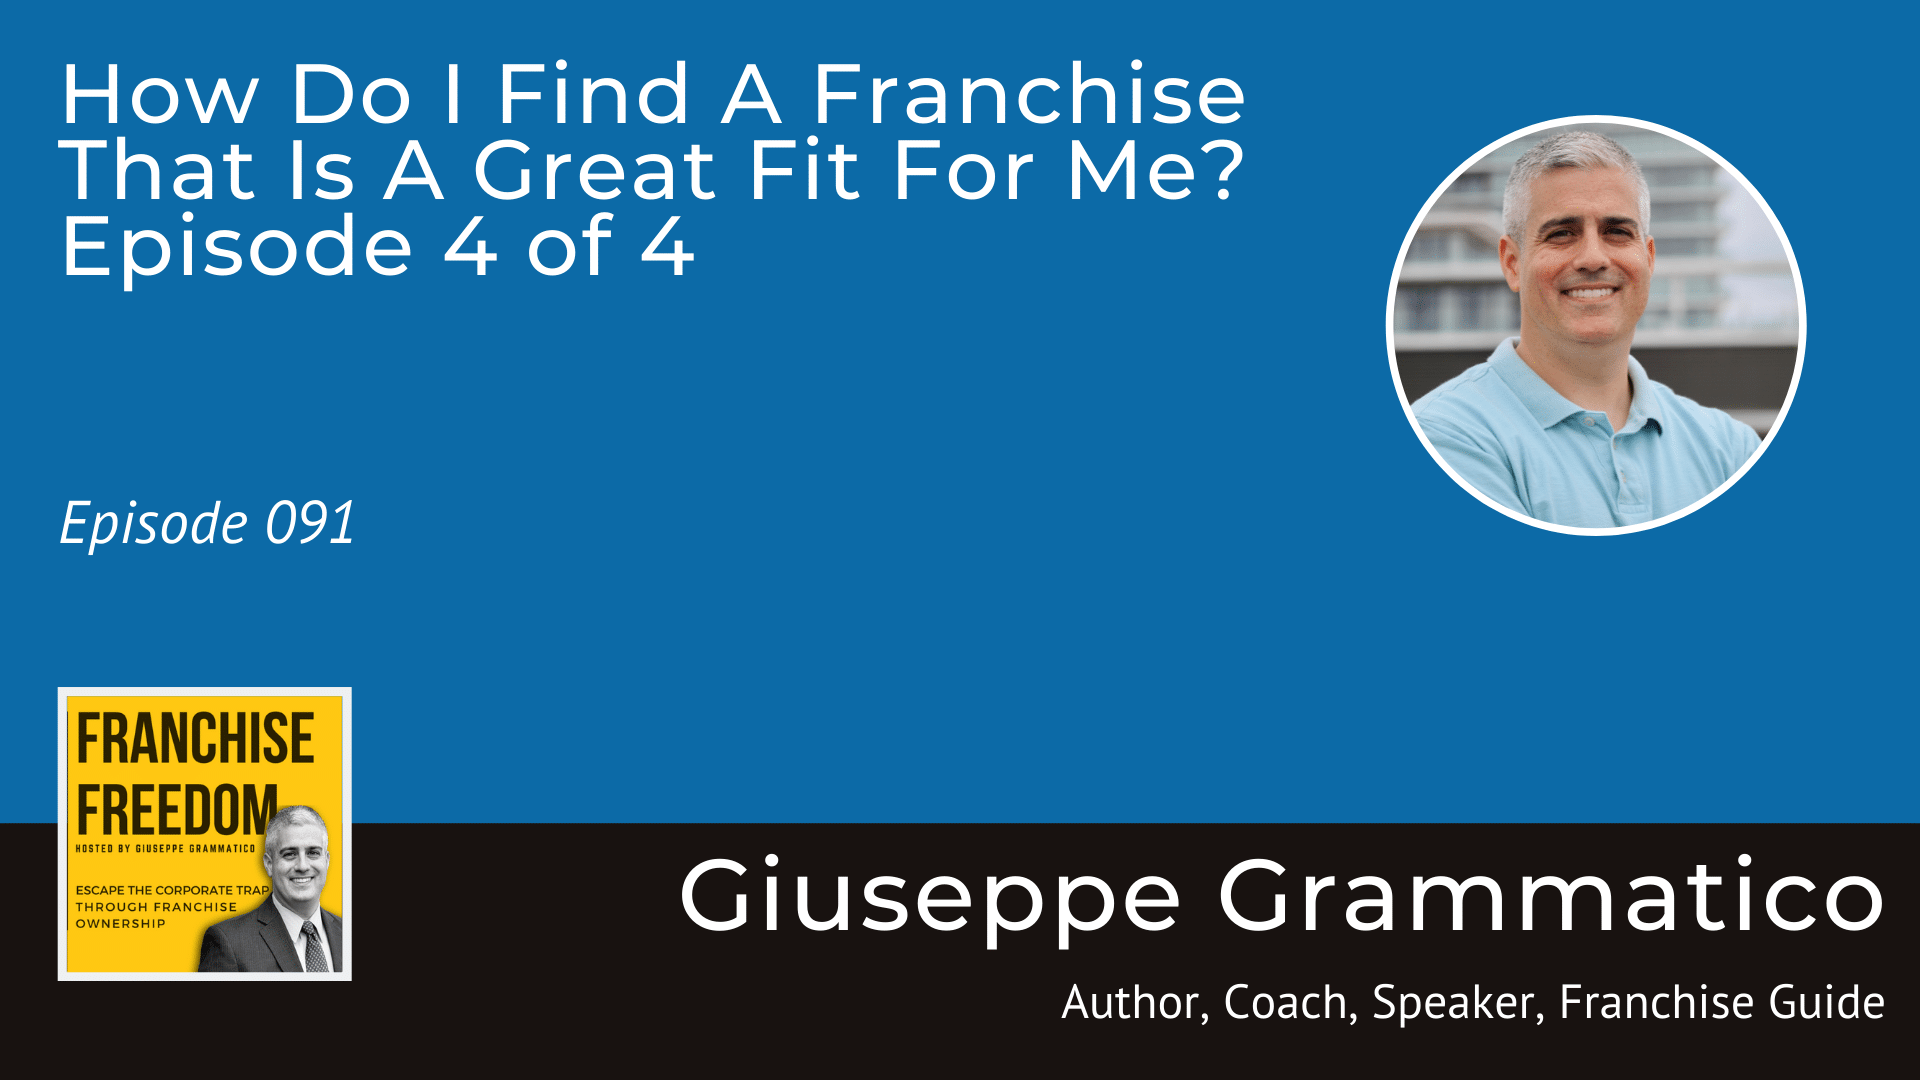 How Do I Find A Franchise That Is A Great Fit For Me? Episode 4 of 4